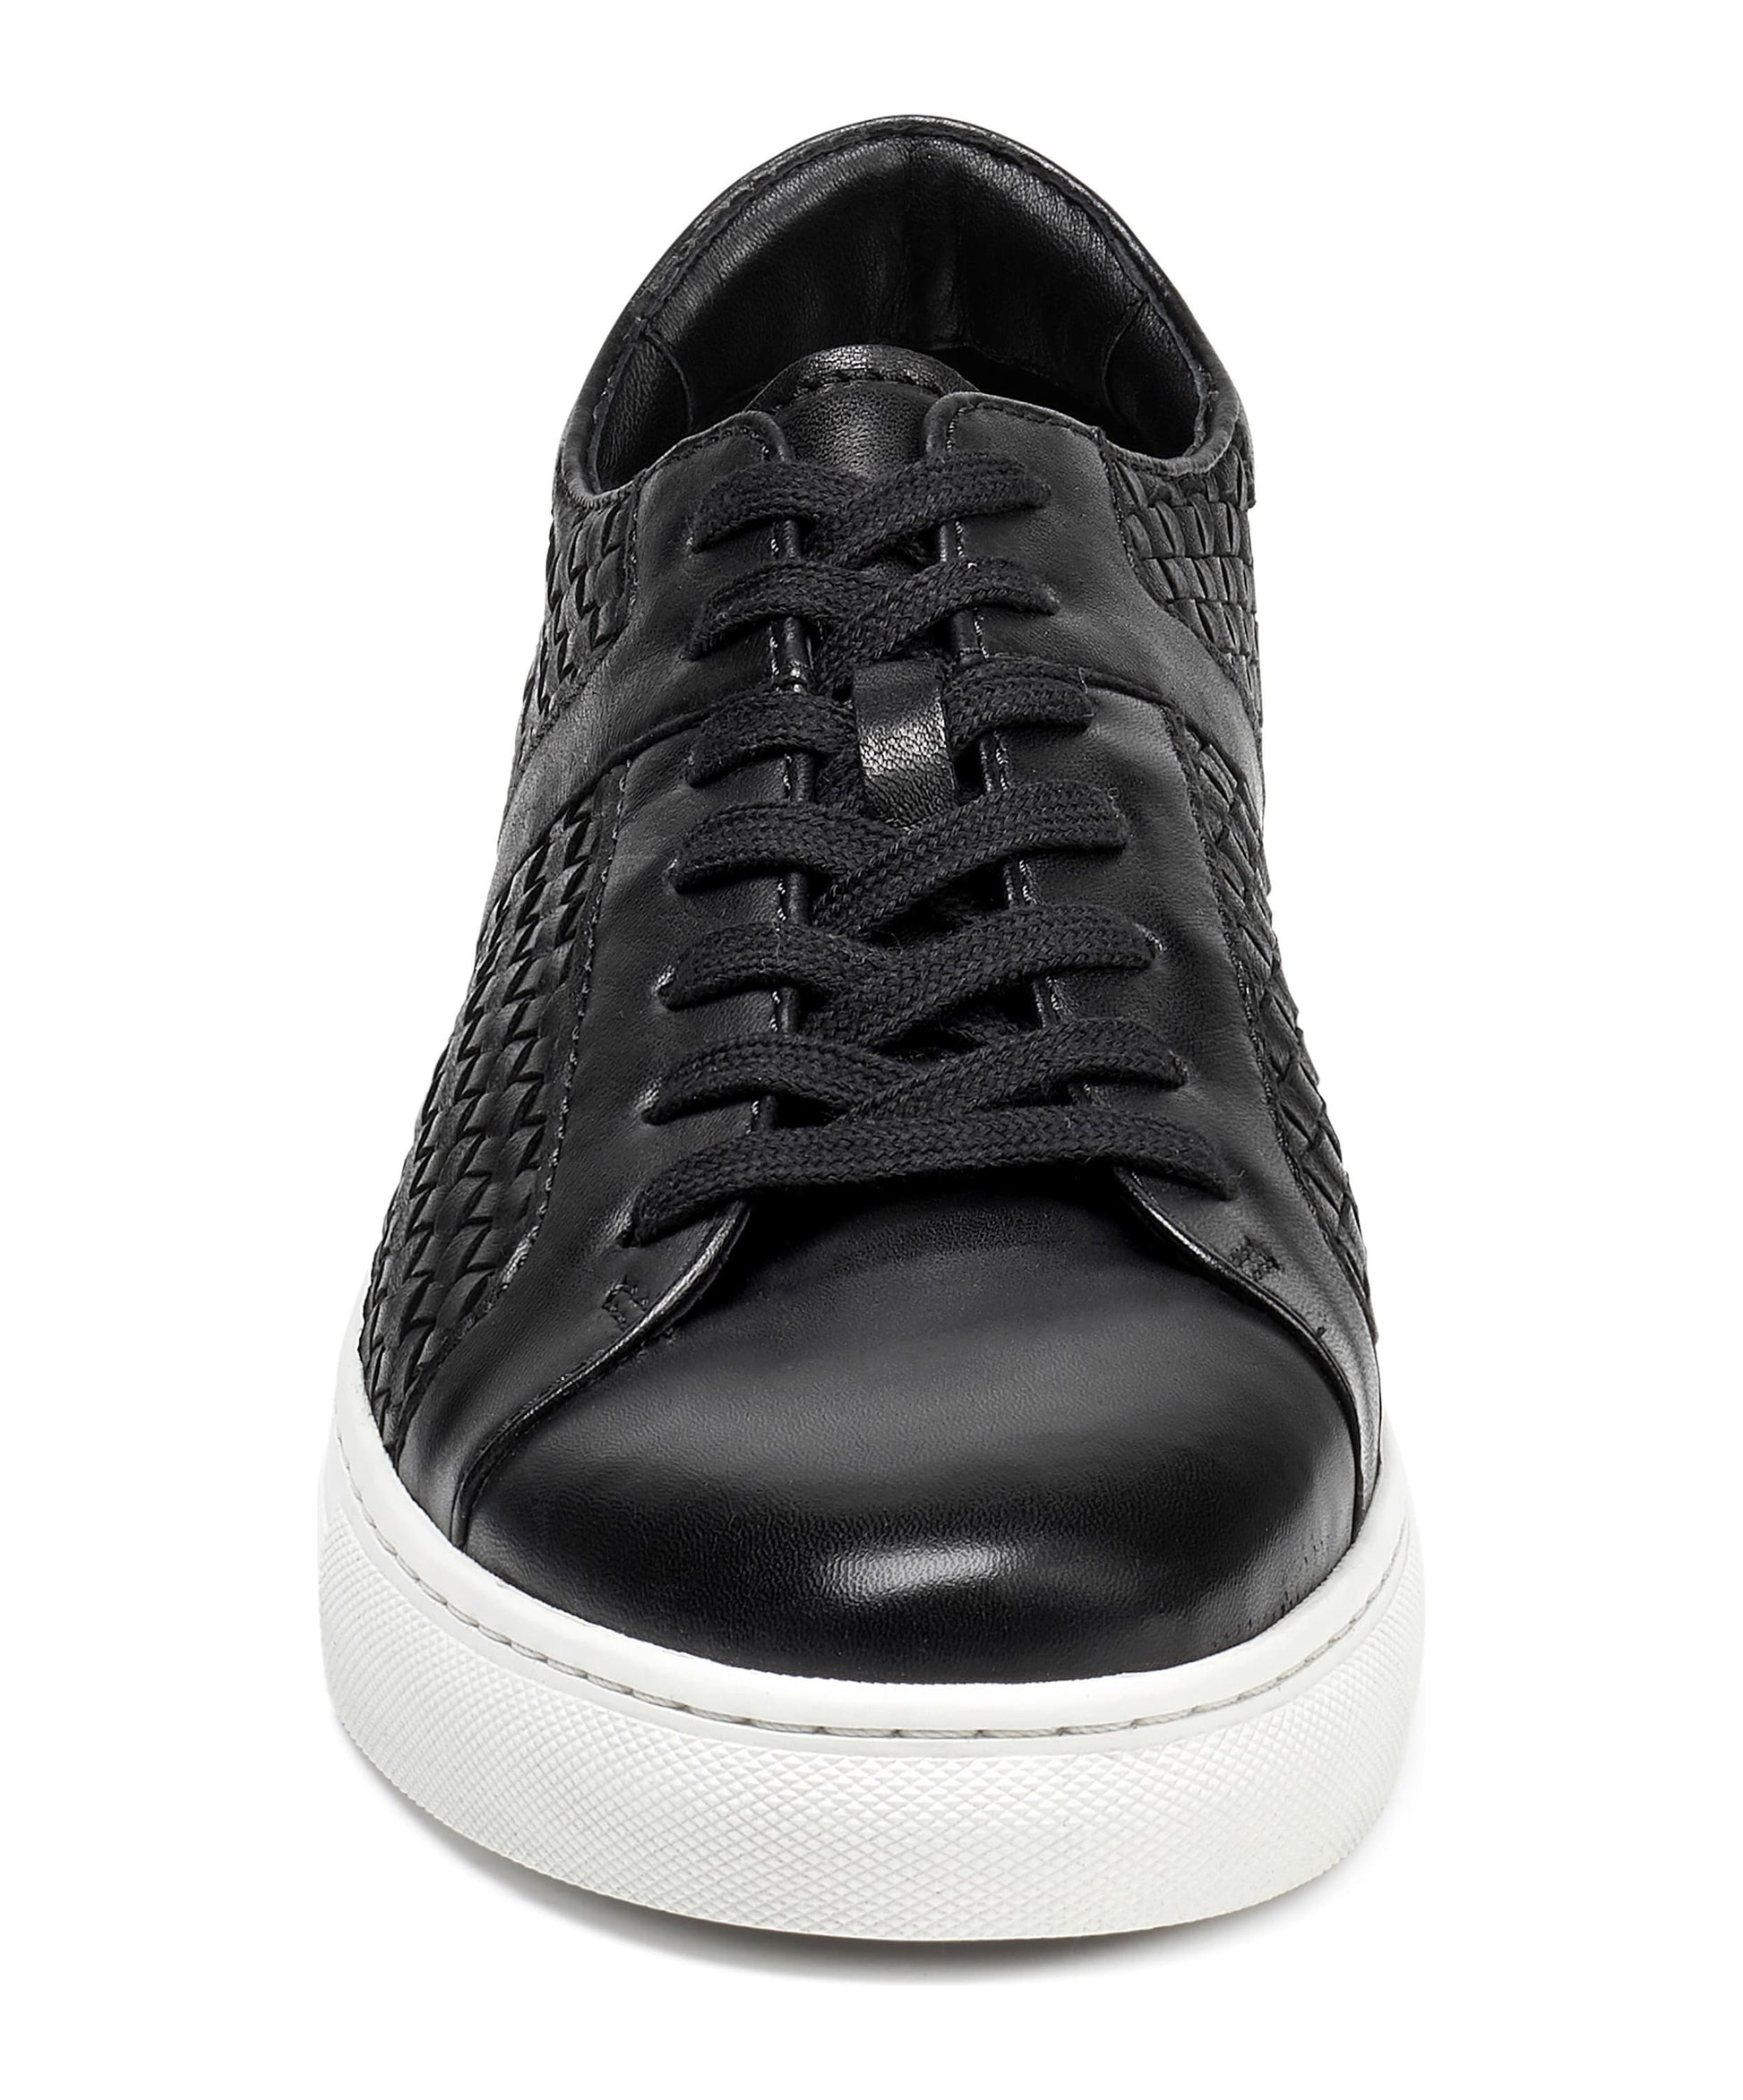 Black Braided Leather Low Top Lace Up Sneaker for Men. White Comfortable Cup Sole.